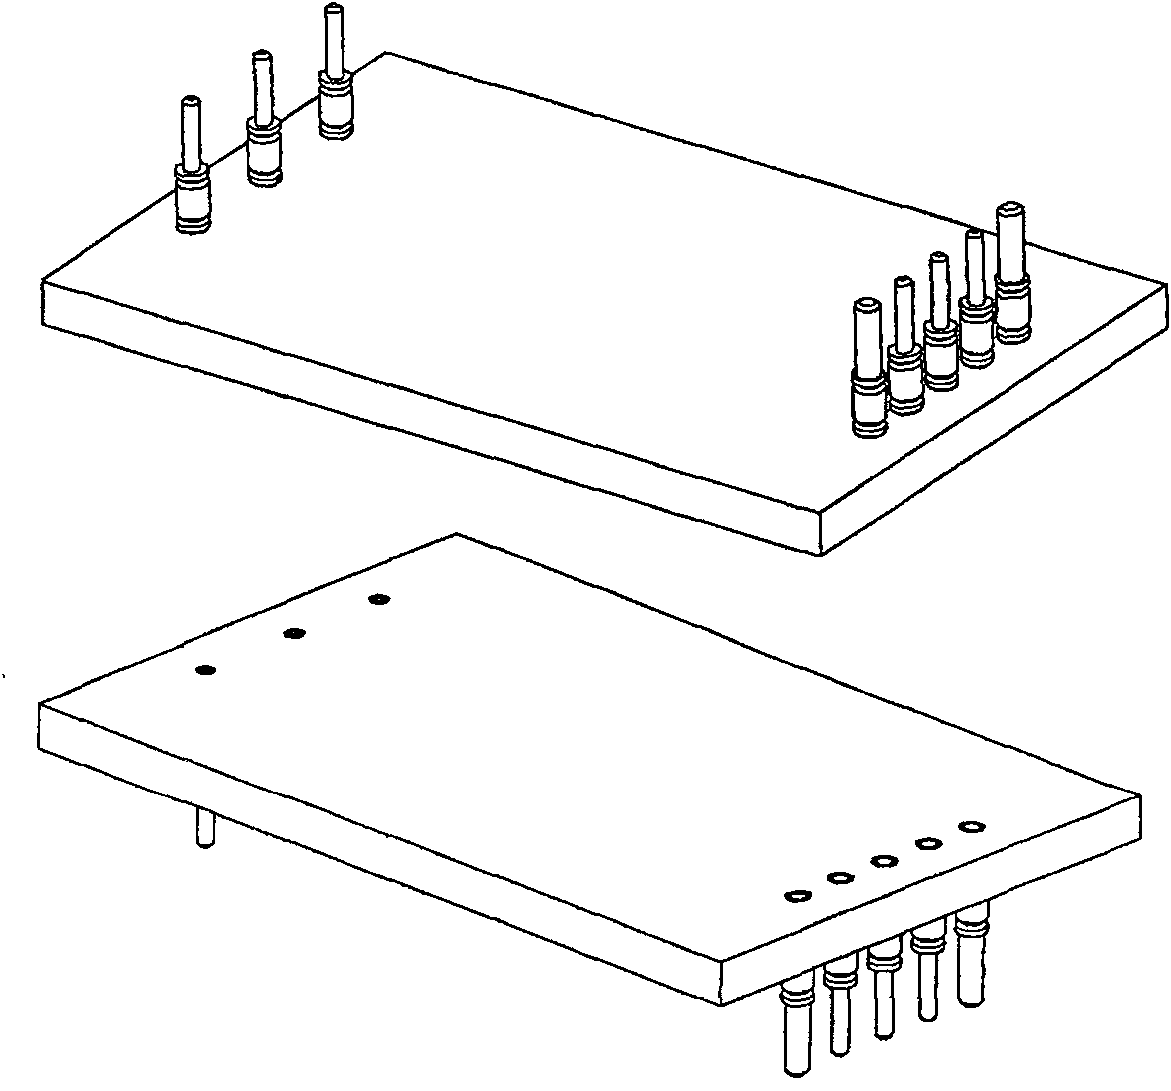 Module power supply pin structural parts